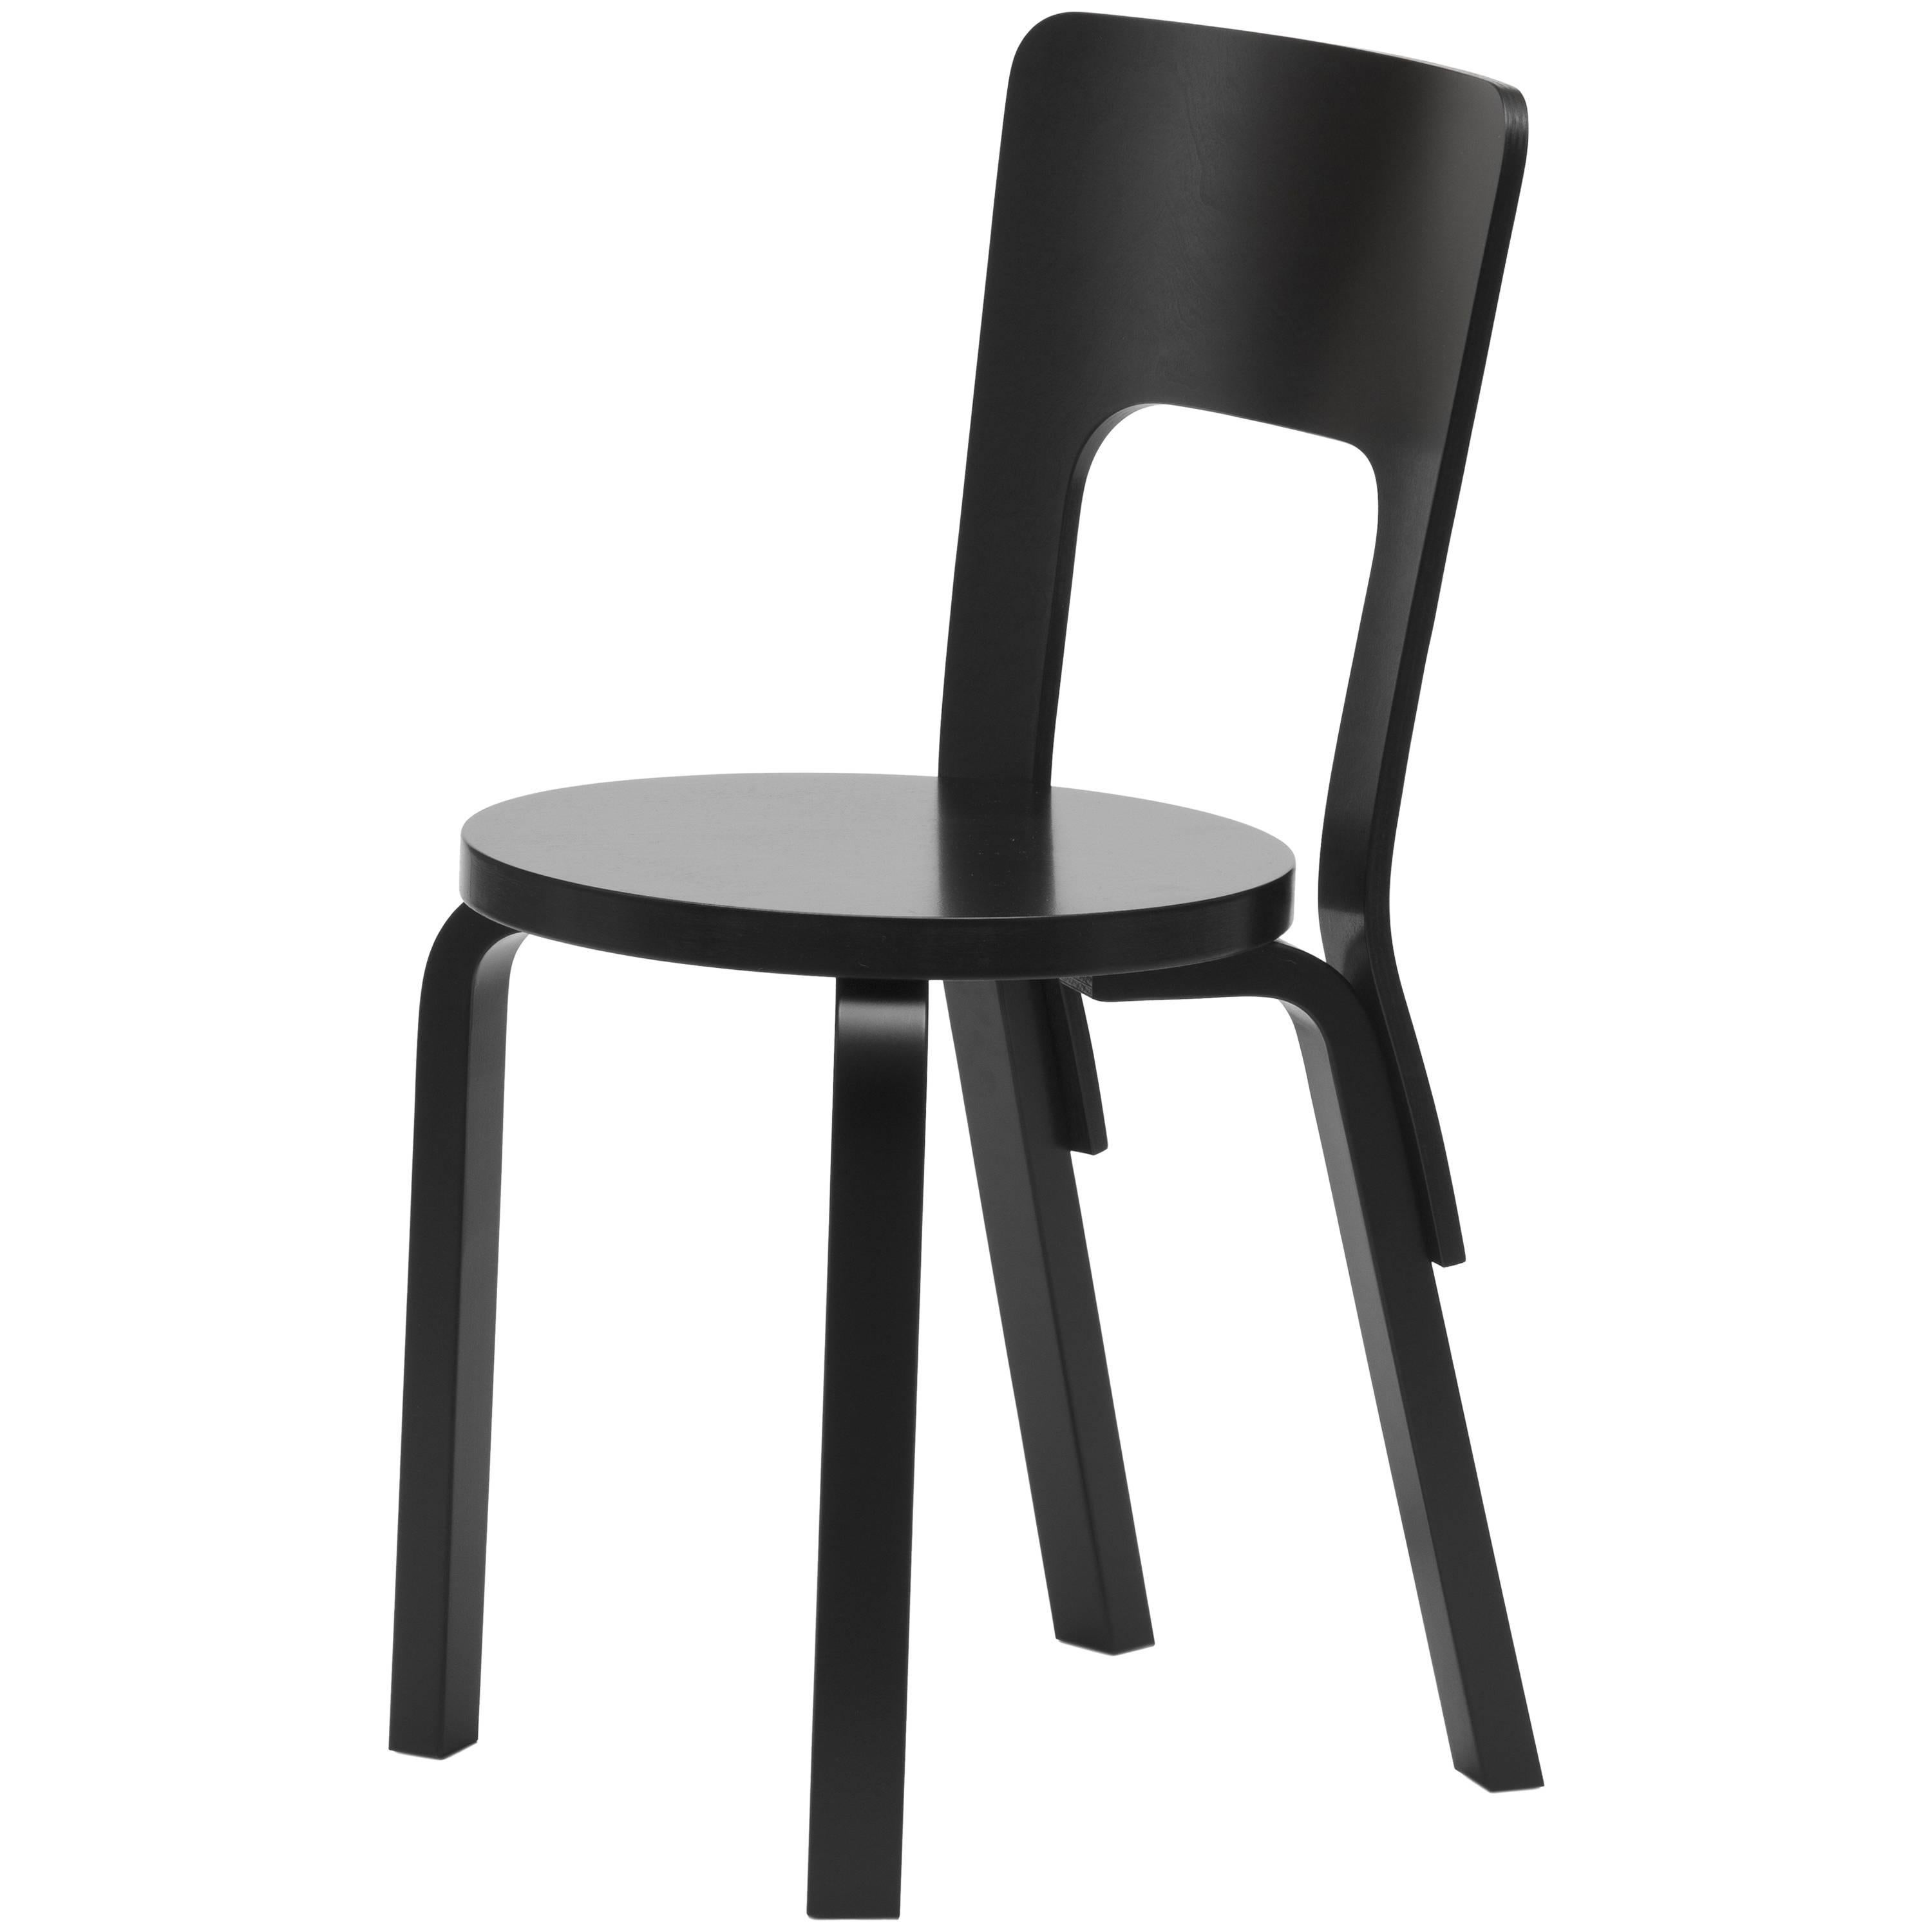 Authentic Chair 66 in Birch with Black Lacquer by Alvar Aalto & Artek For Sale